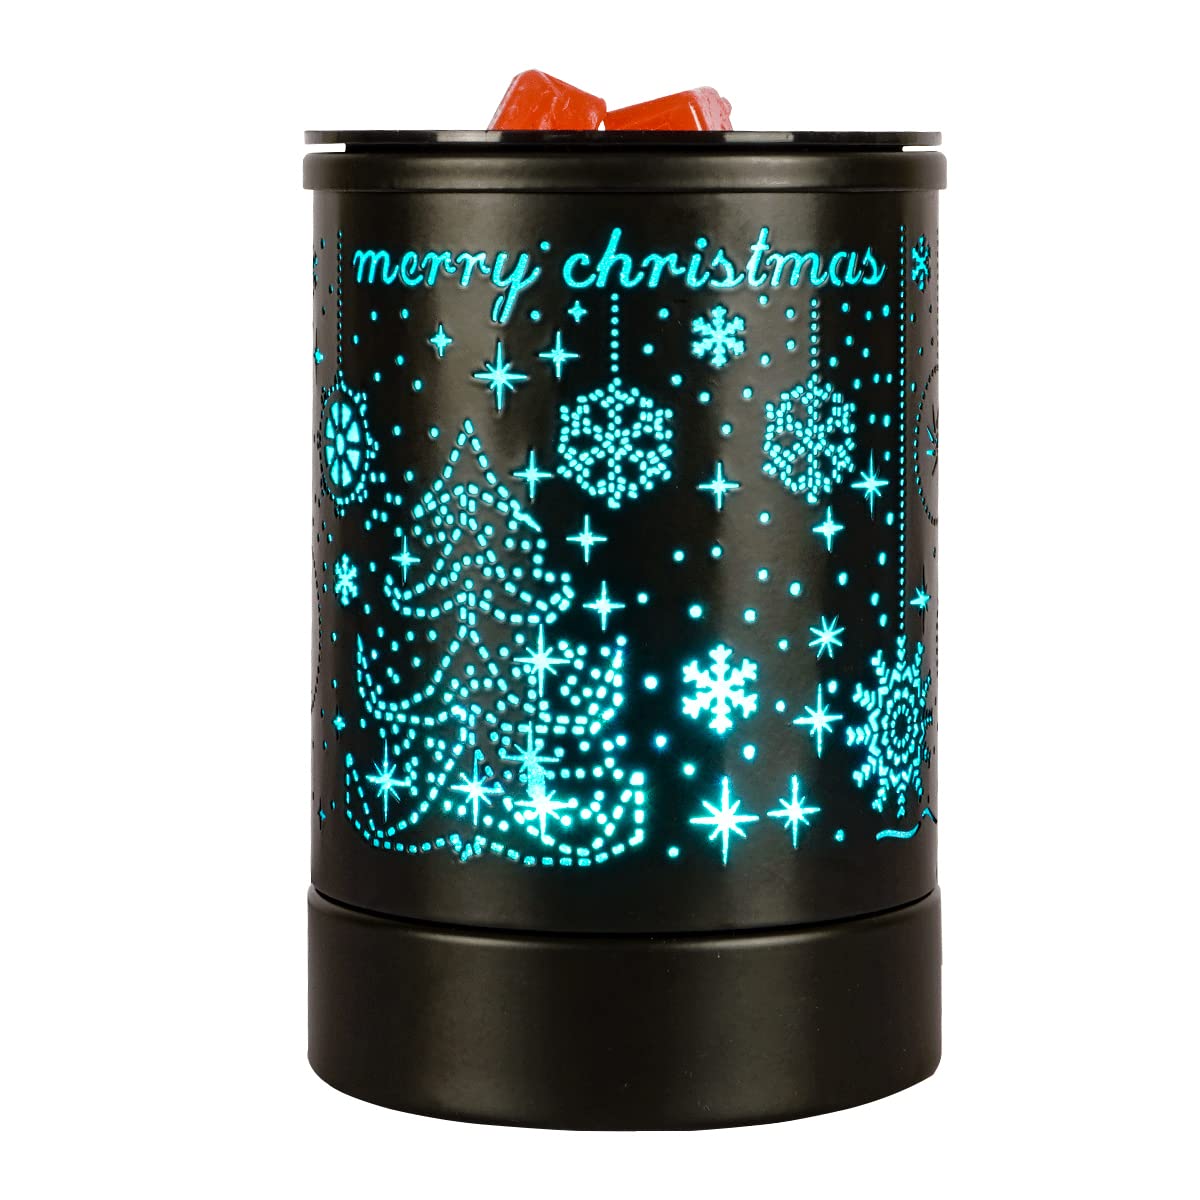 Enaroma Christmas Wax Warmer Black Wax Melter for Scented Wax